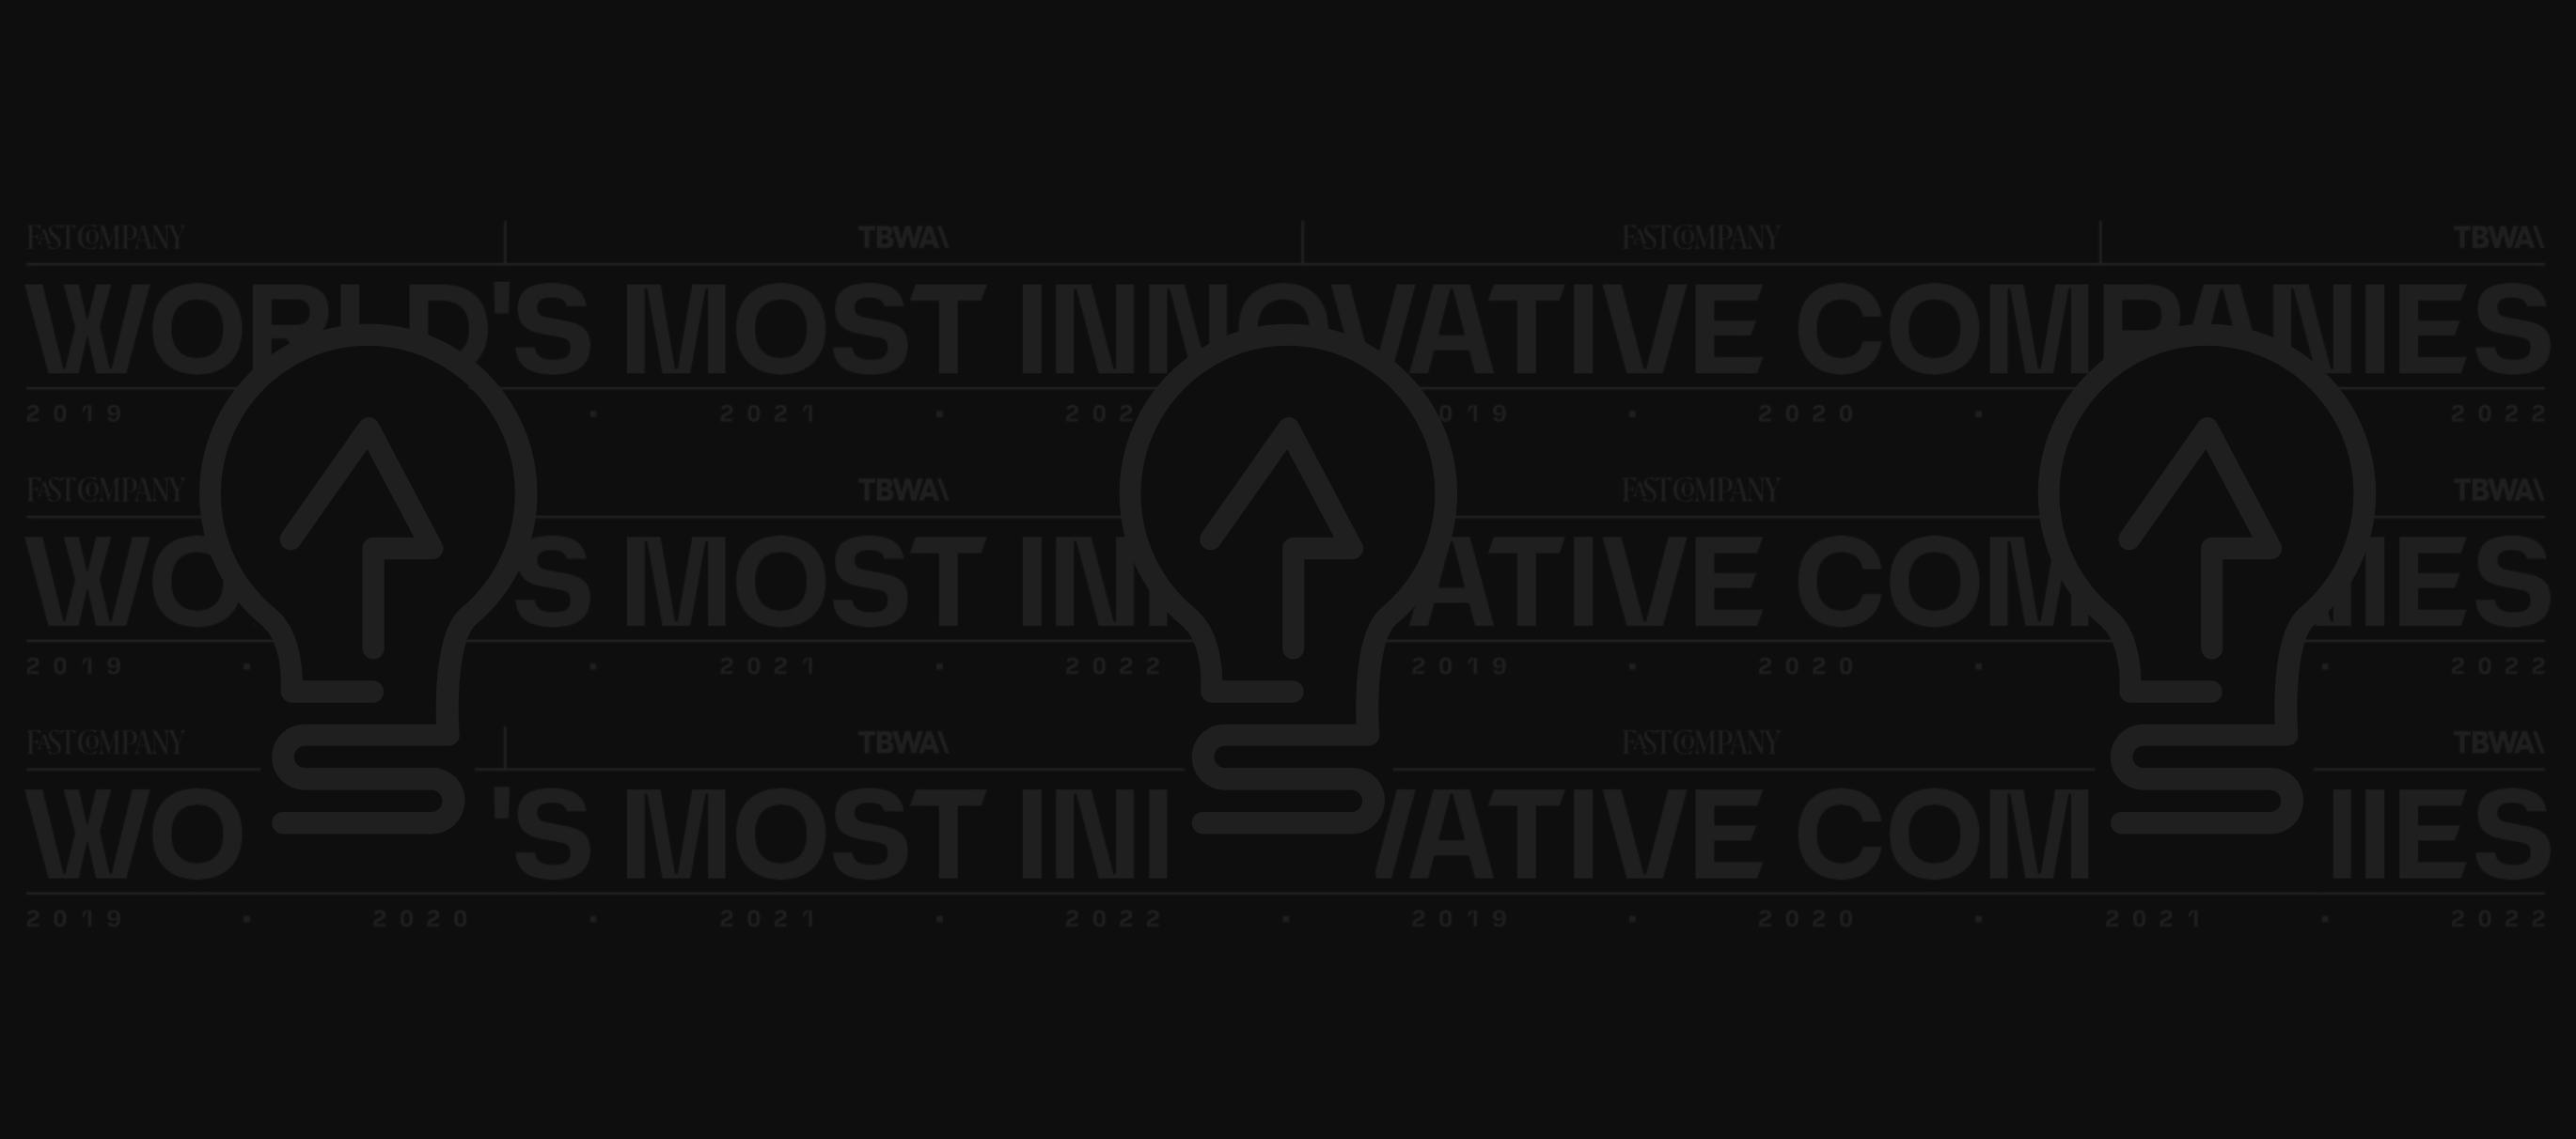 Black Background with dark grey copy that reads "TBWA World's Most Innovative Company" repeatedly